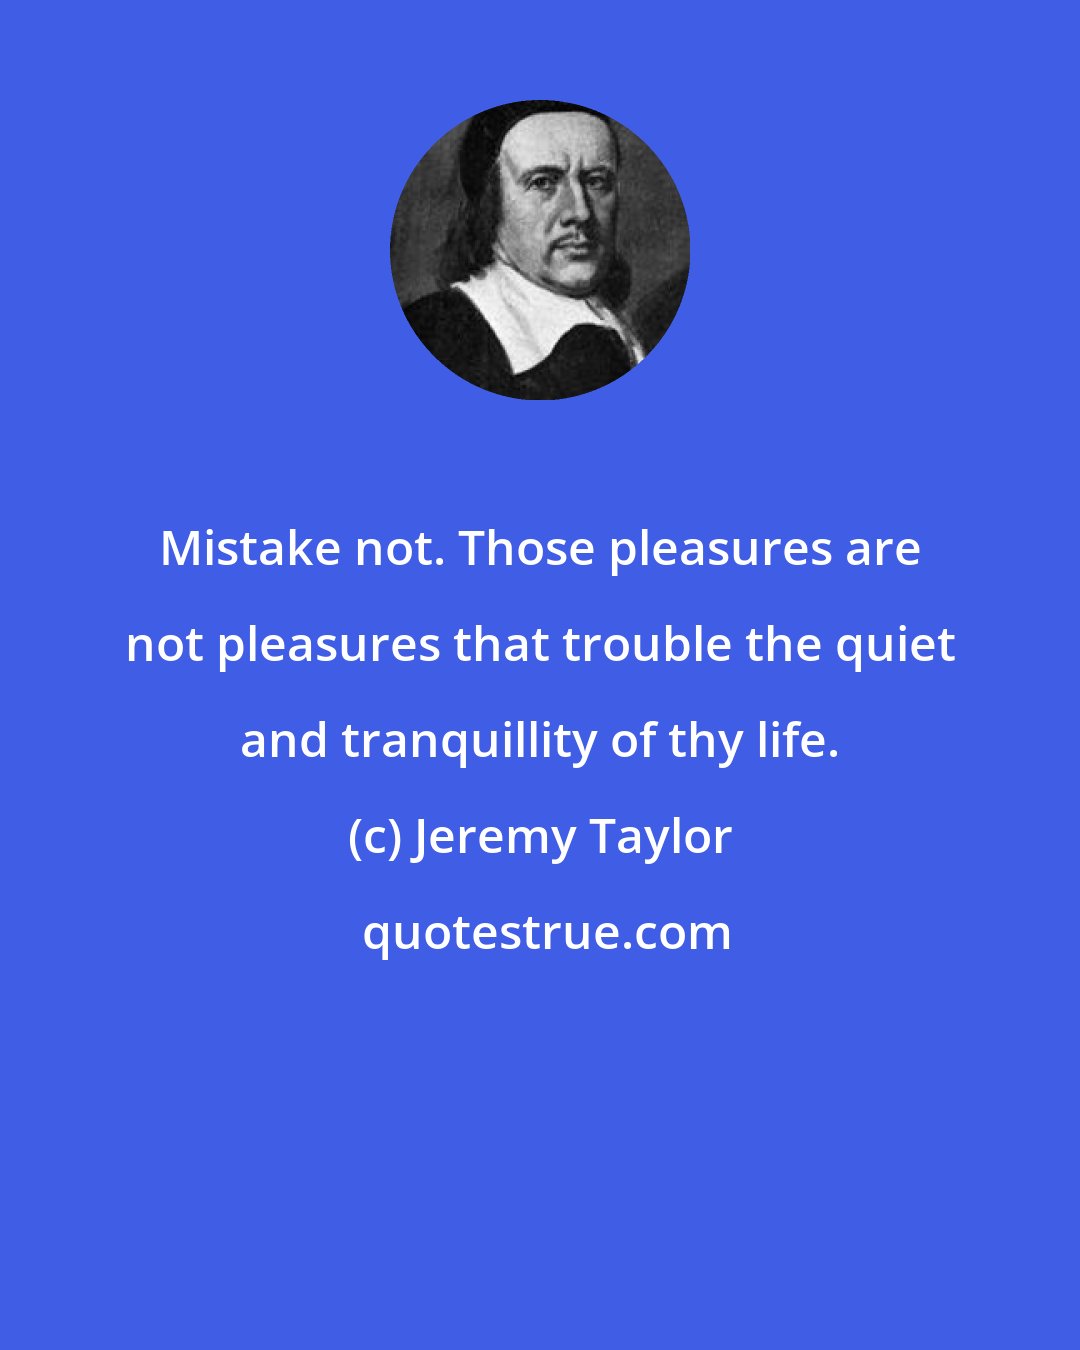 Jeremy Taylor: Mistake not. Those pleasures are not pleasures that trouble the quiet and tranquillity of thy life.